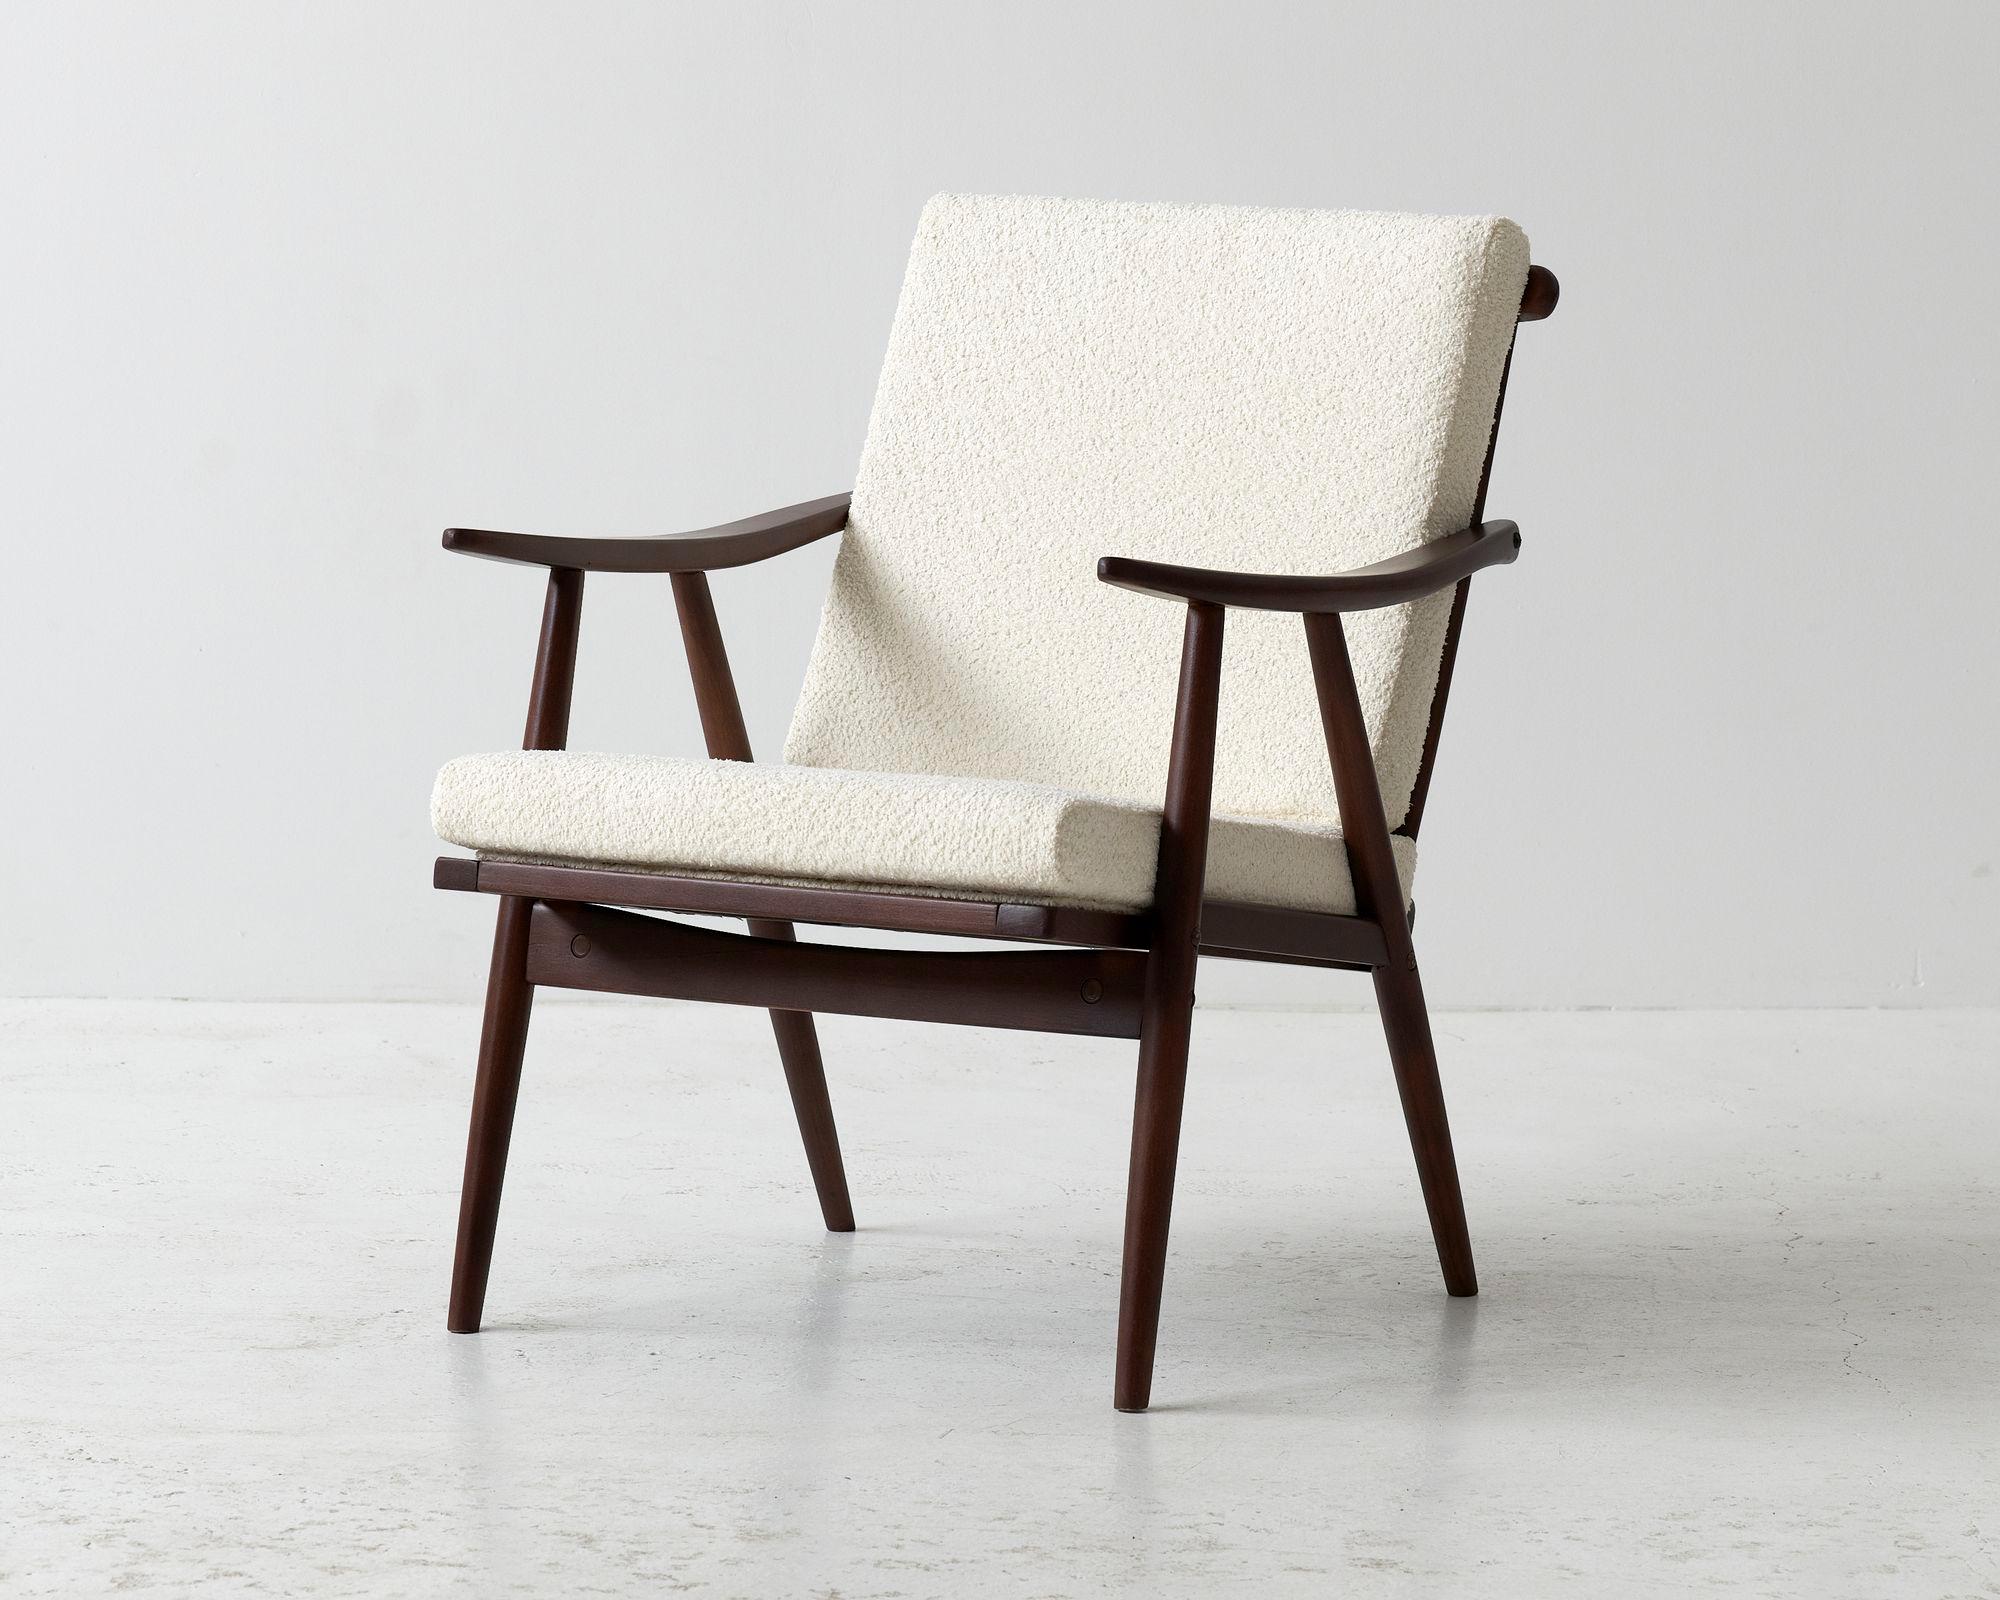 A unique armchair produced during the 1960's in former Czechoslovakia. Attributed to Thonet. Wooden frame cleaned, varnished, lacquered. Seating recreated and reupholstered in a creme boucle fabric. 